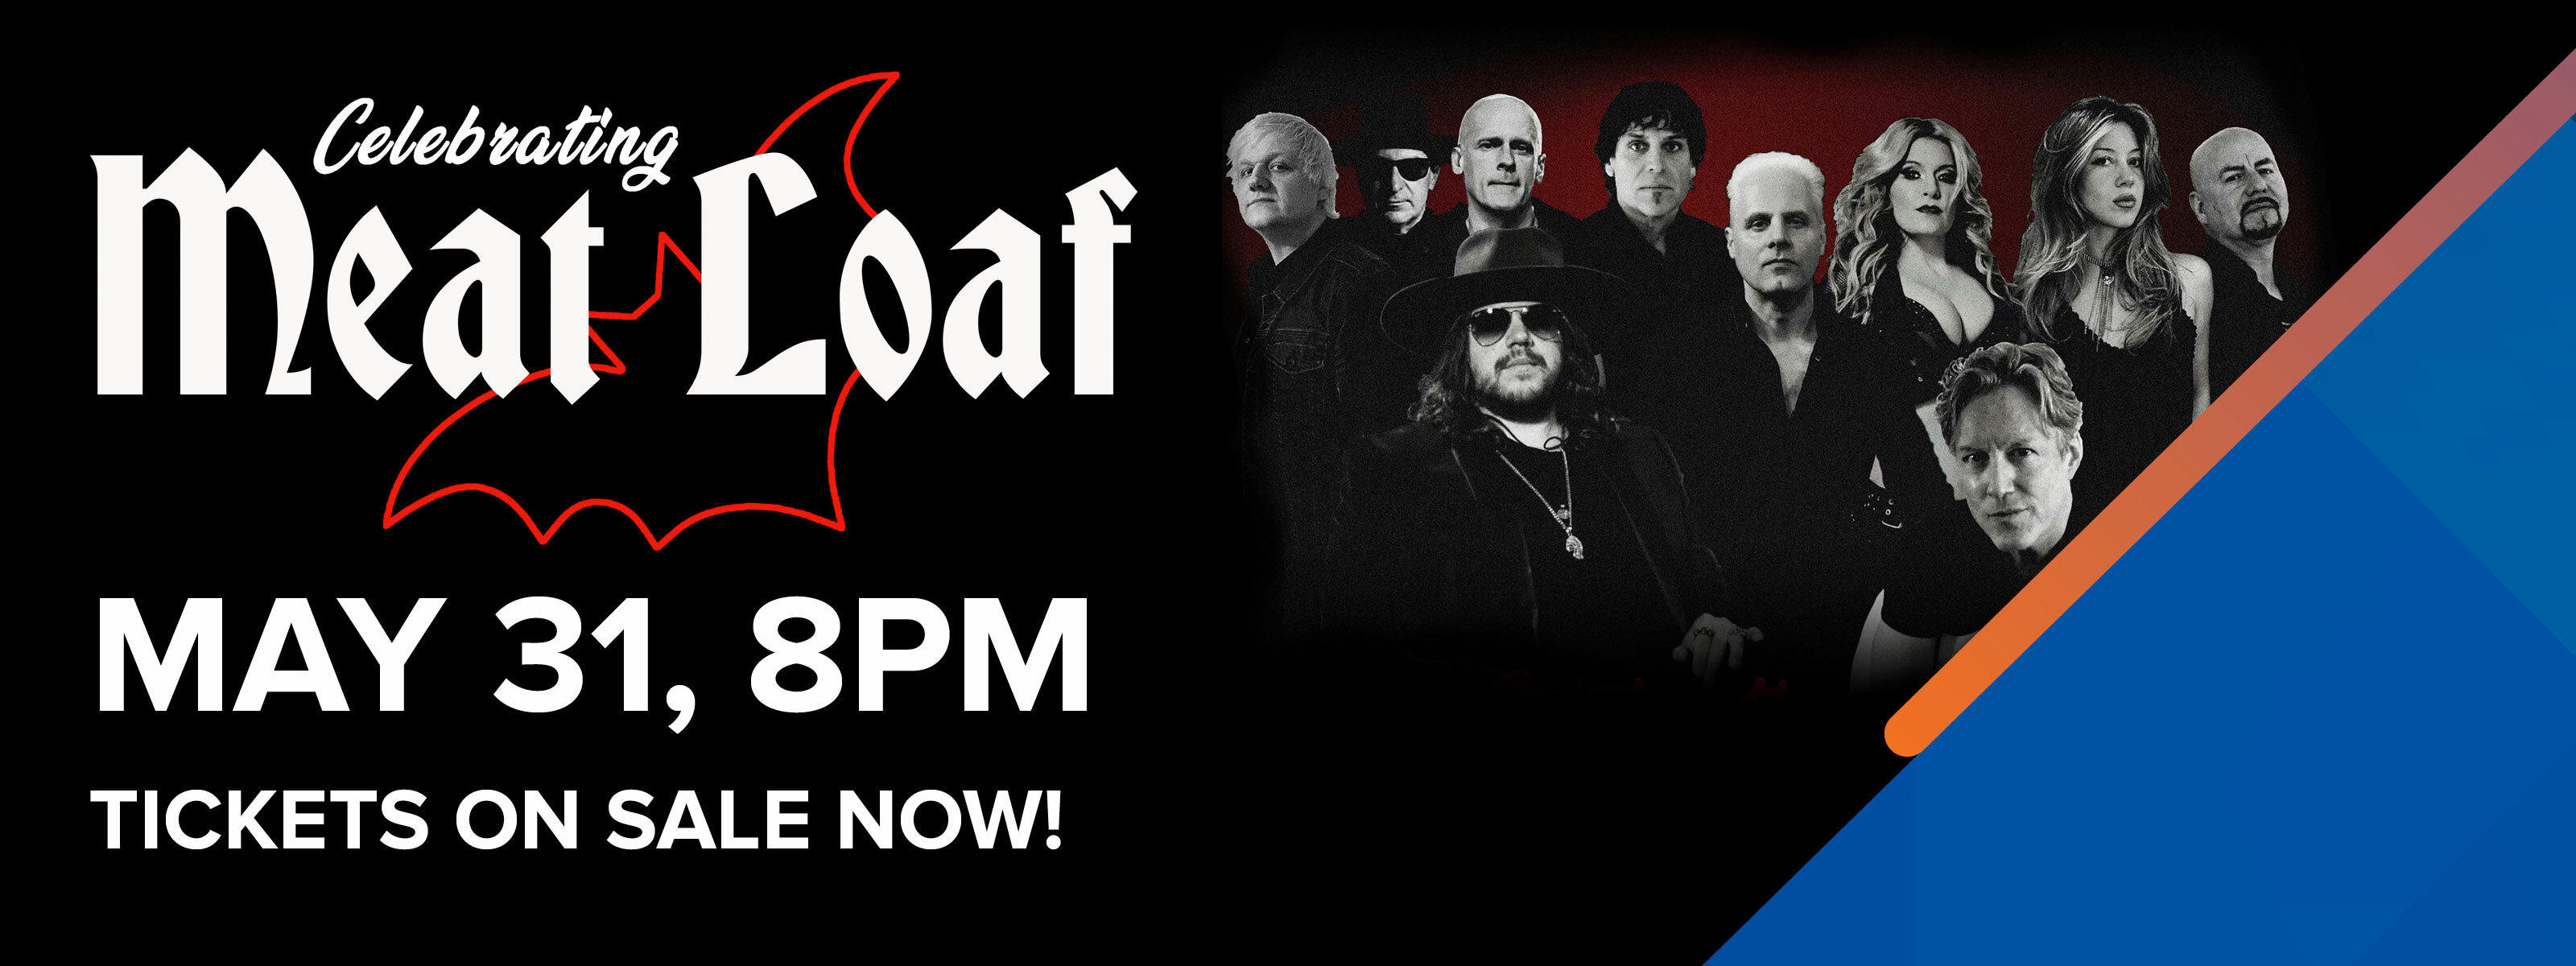 Celebrating Meat Loaf May 31, 8pm. Tickets On Sale Now